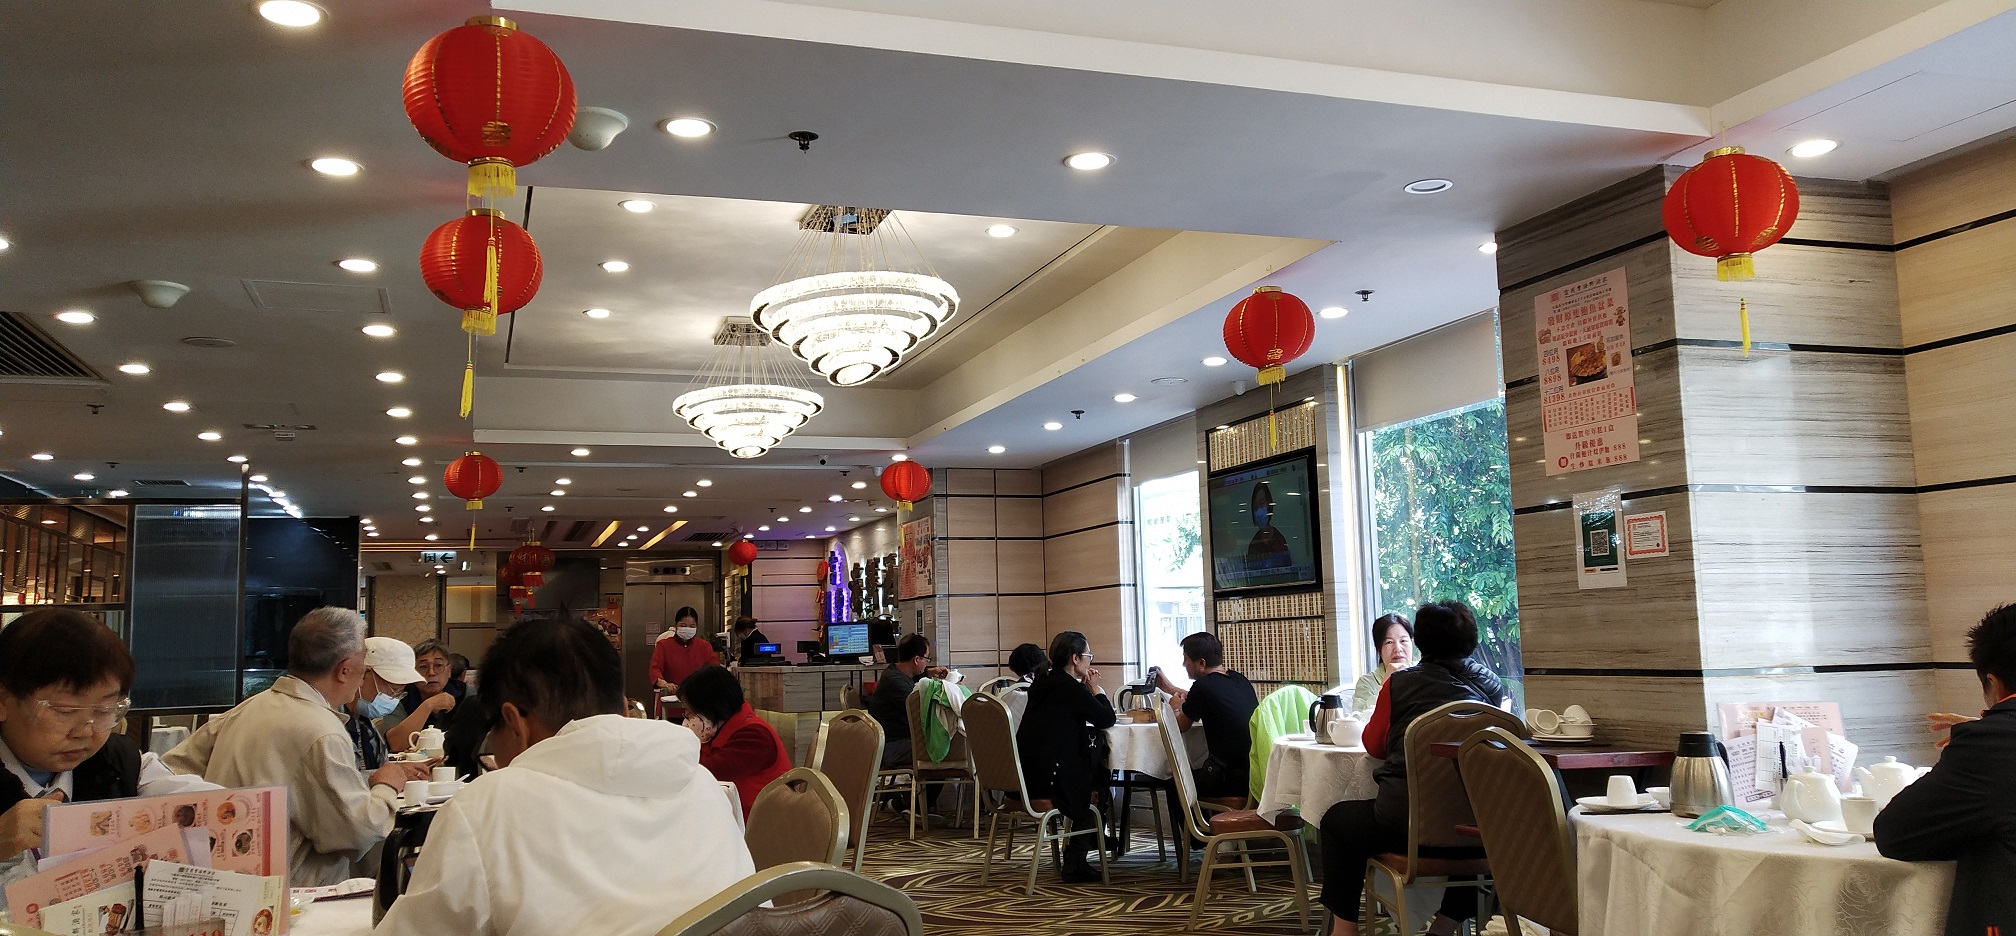 Dim sum restaurant gets more diners after government's easing of social distancing measures.